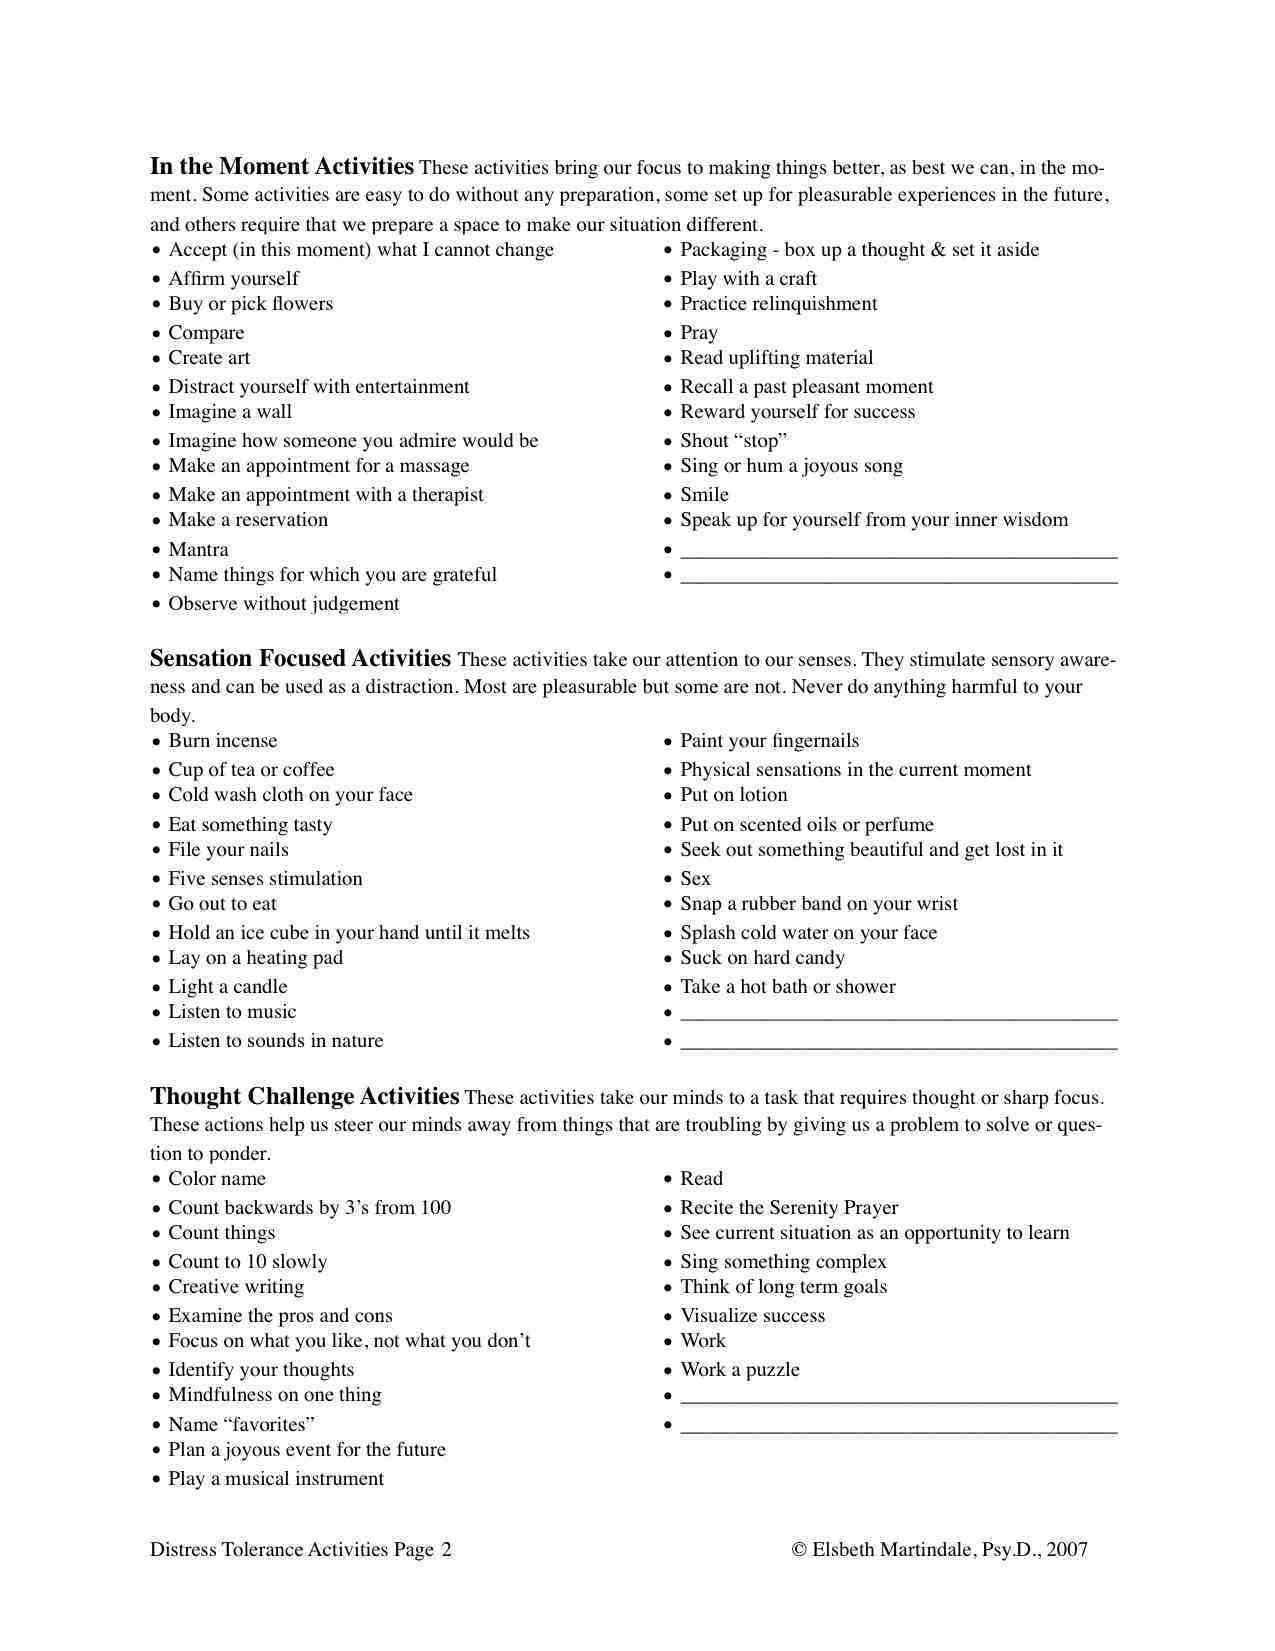 Distress Tolerance Worksheets Facebook When To Use Crisis Survival 